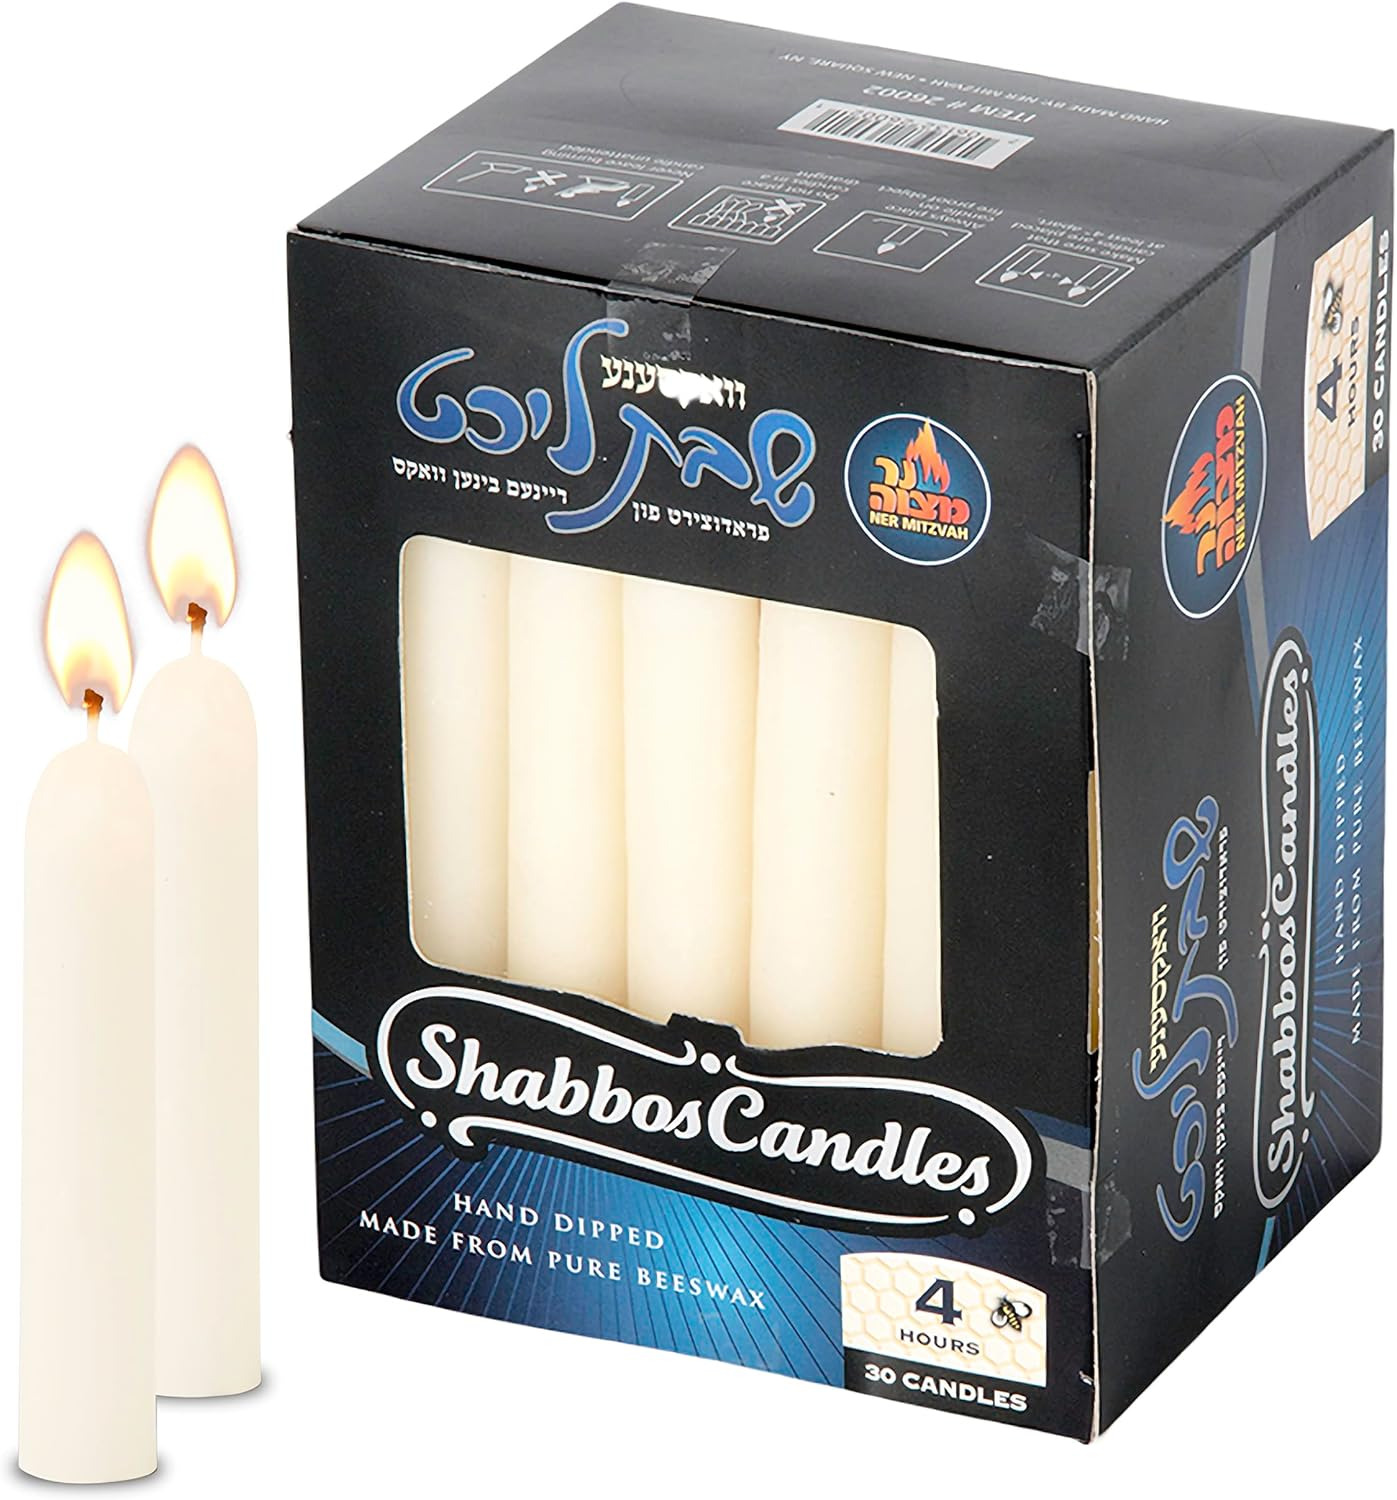 White Beeswax Shabbat Candles – Hand Dipped, Unbleached Traditional Shabbos Cand